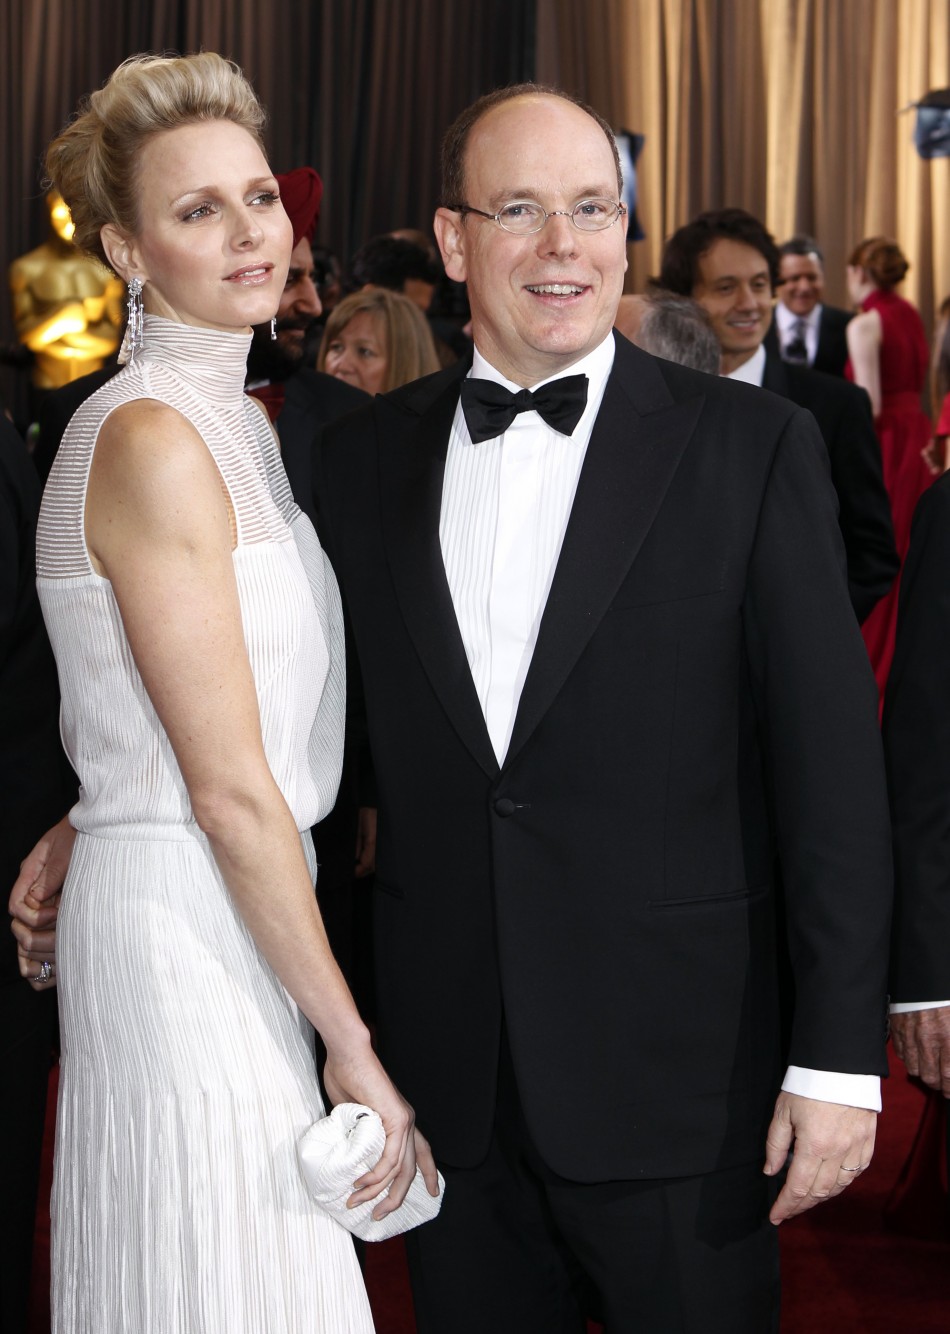 Prince Albert of Monaco and wife Princess Charlene L arrive at the 84th Academy Awards in Hollywood